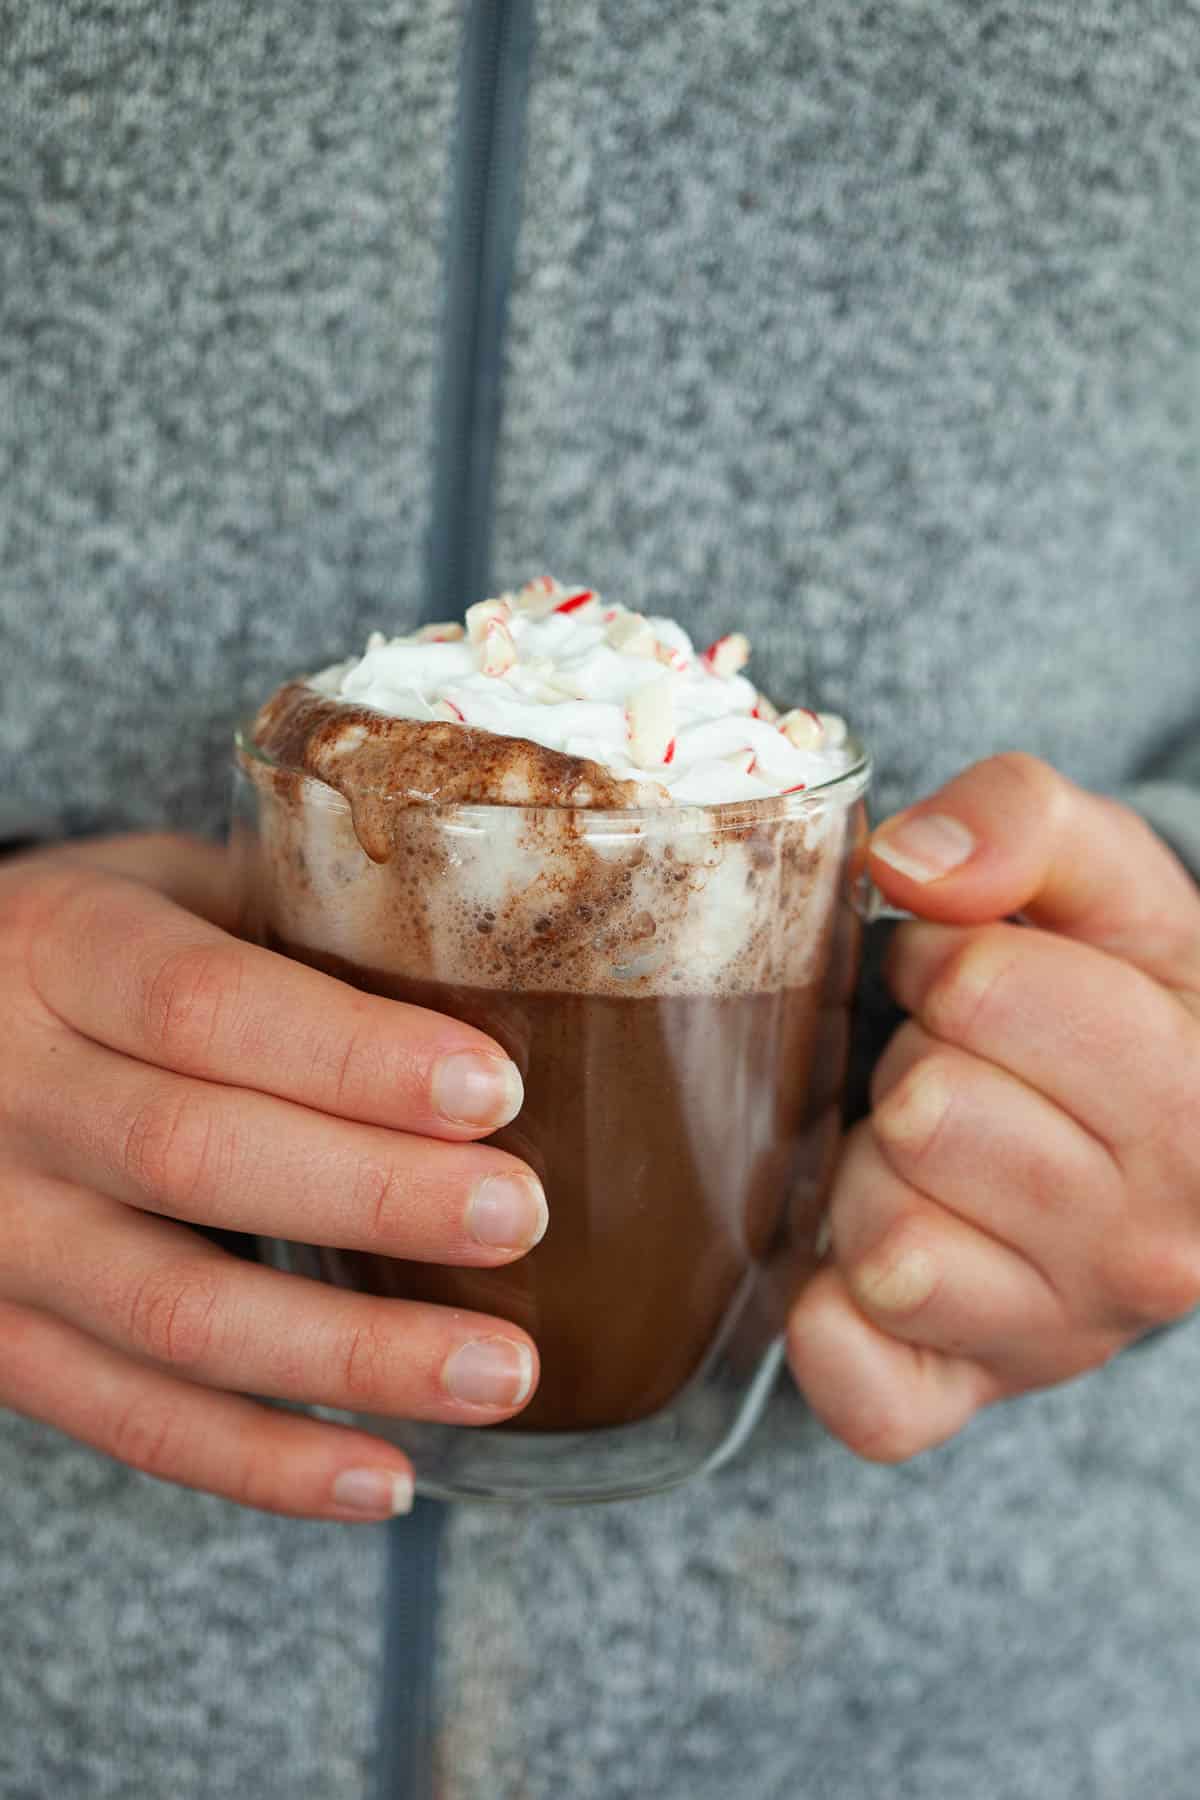 peppermint hot chocolate served with whipped cream